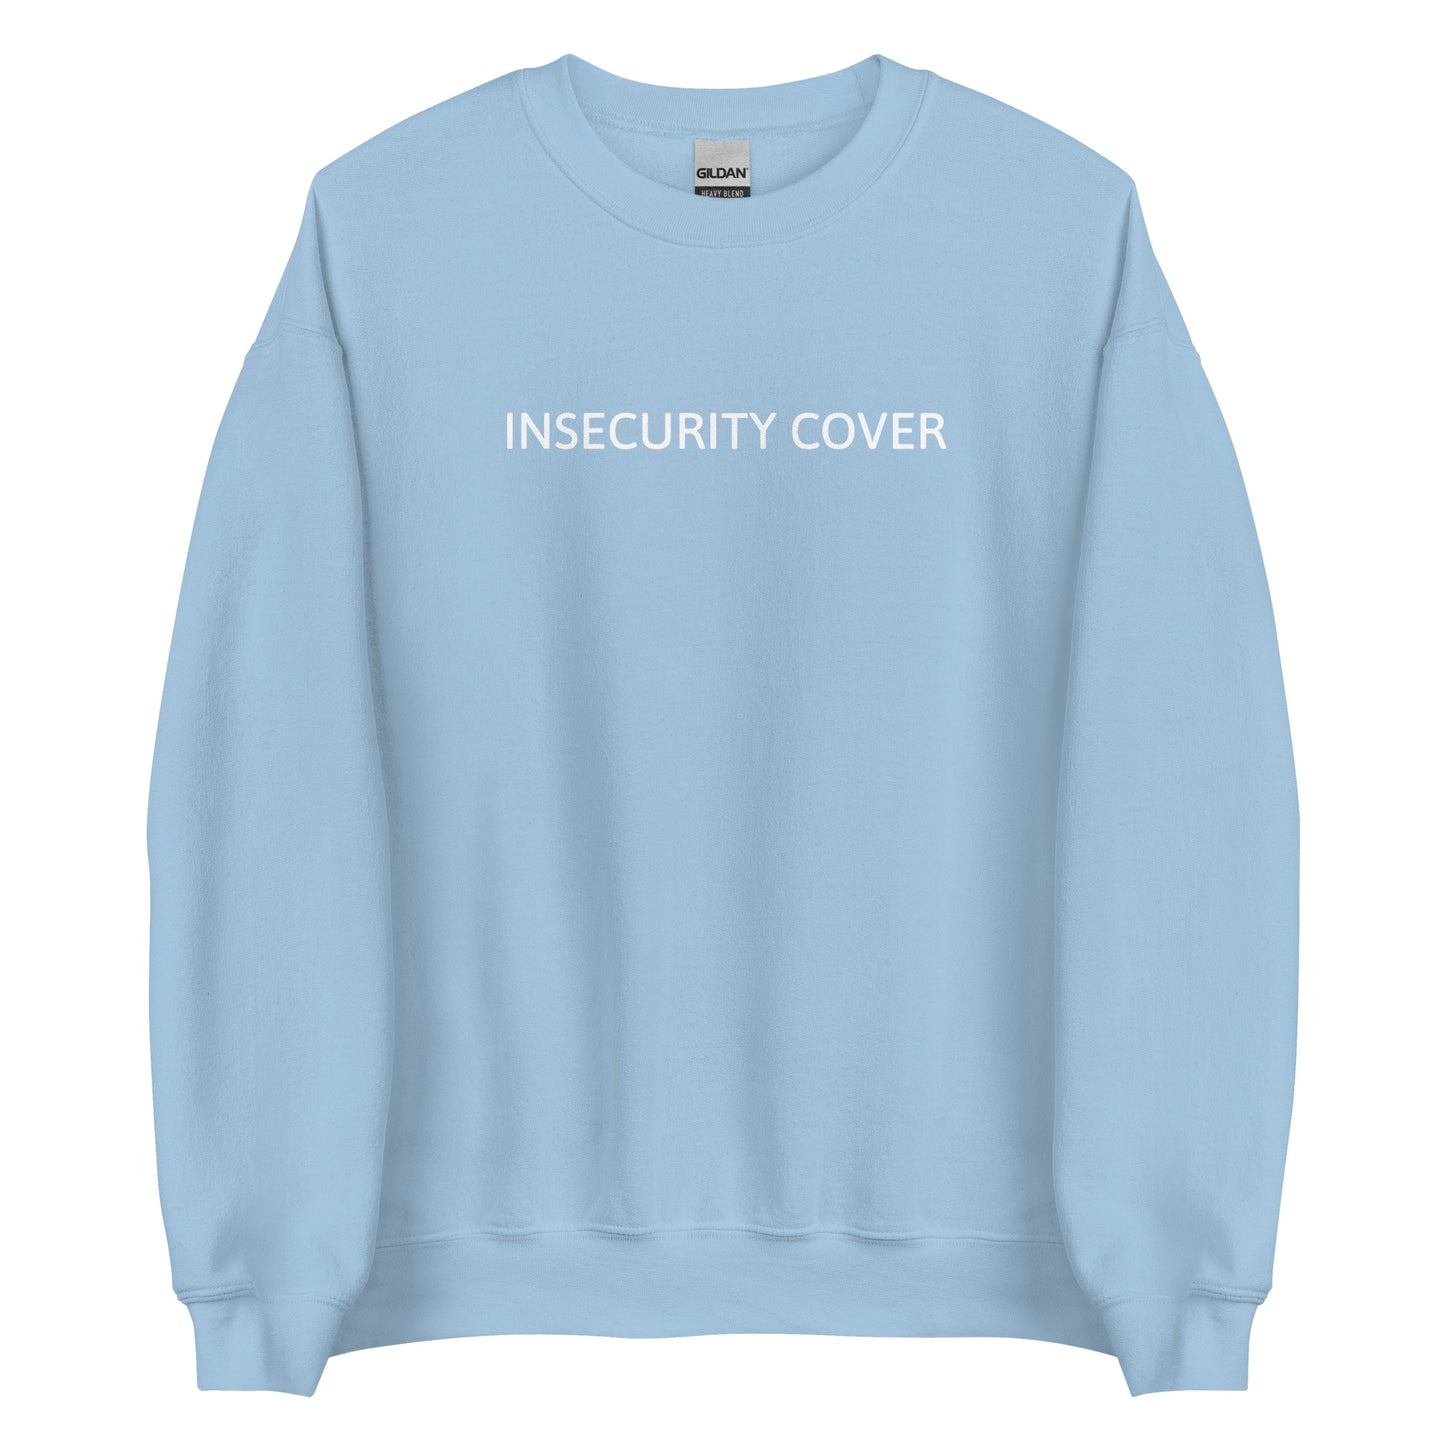 INSECURITY COVER